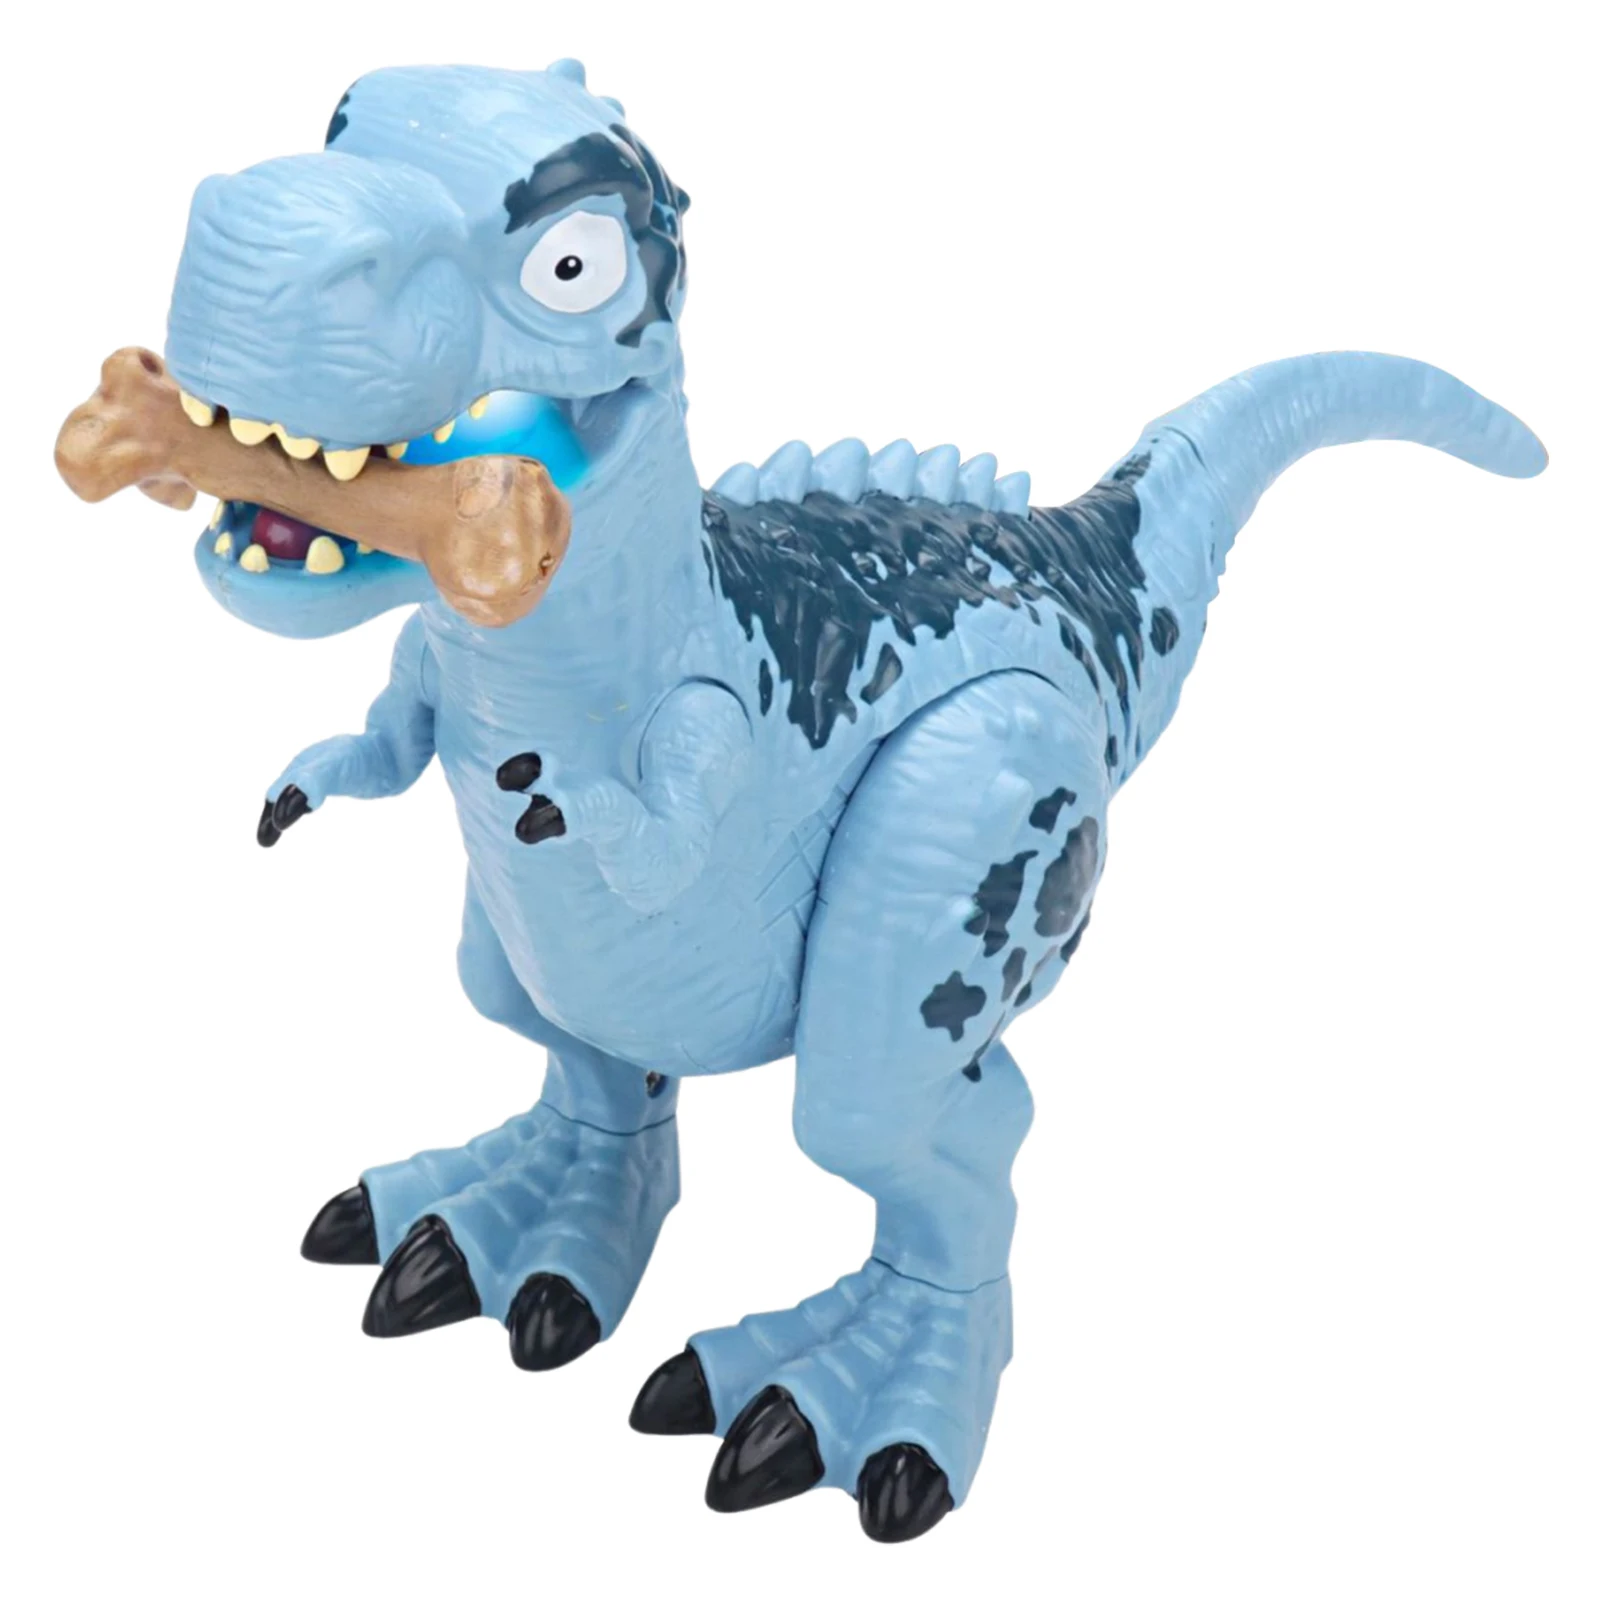 

Dinosaur Play Toys Electric Dinosaur Toy With Tyrannosaurus Roars Moves Mouth And Tail Battery Powered Robotic Toy For Kids